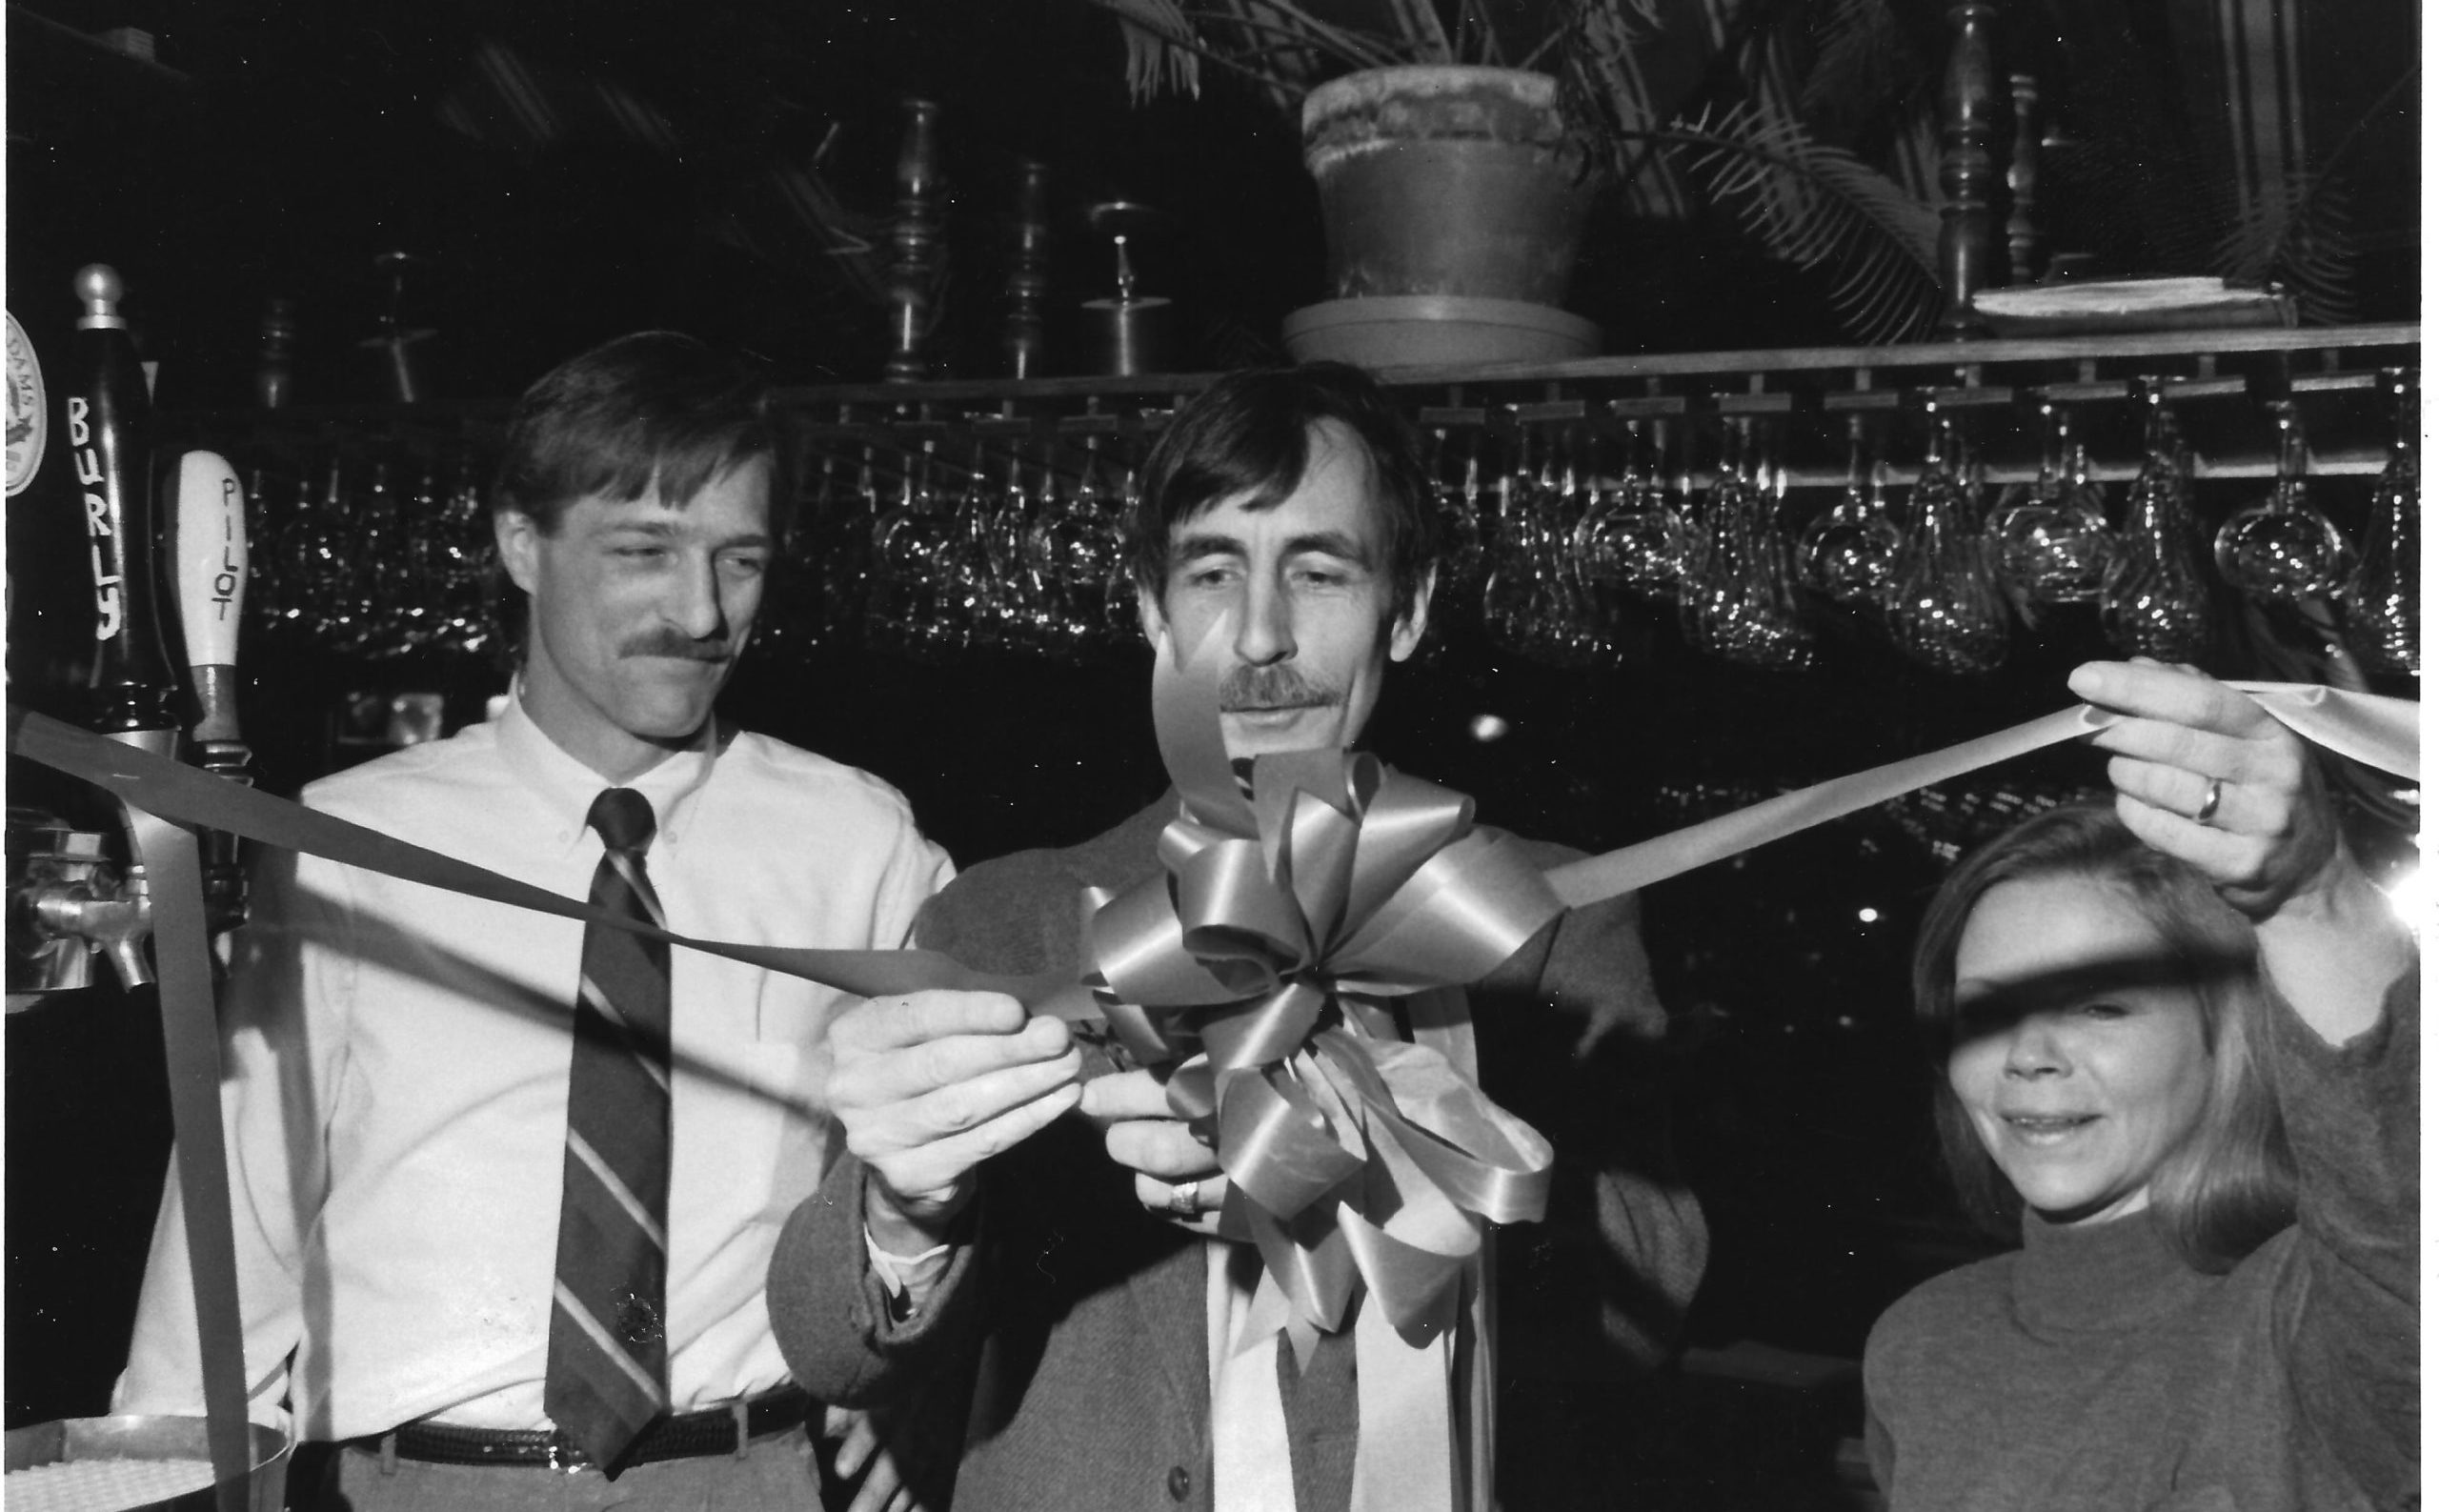 Vermont Pub and Brewery's ribbon cutting in 1988